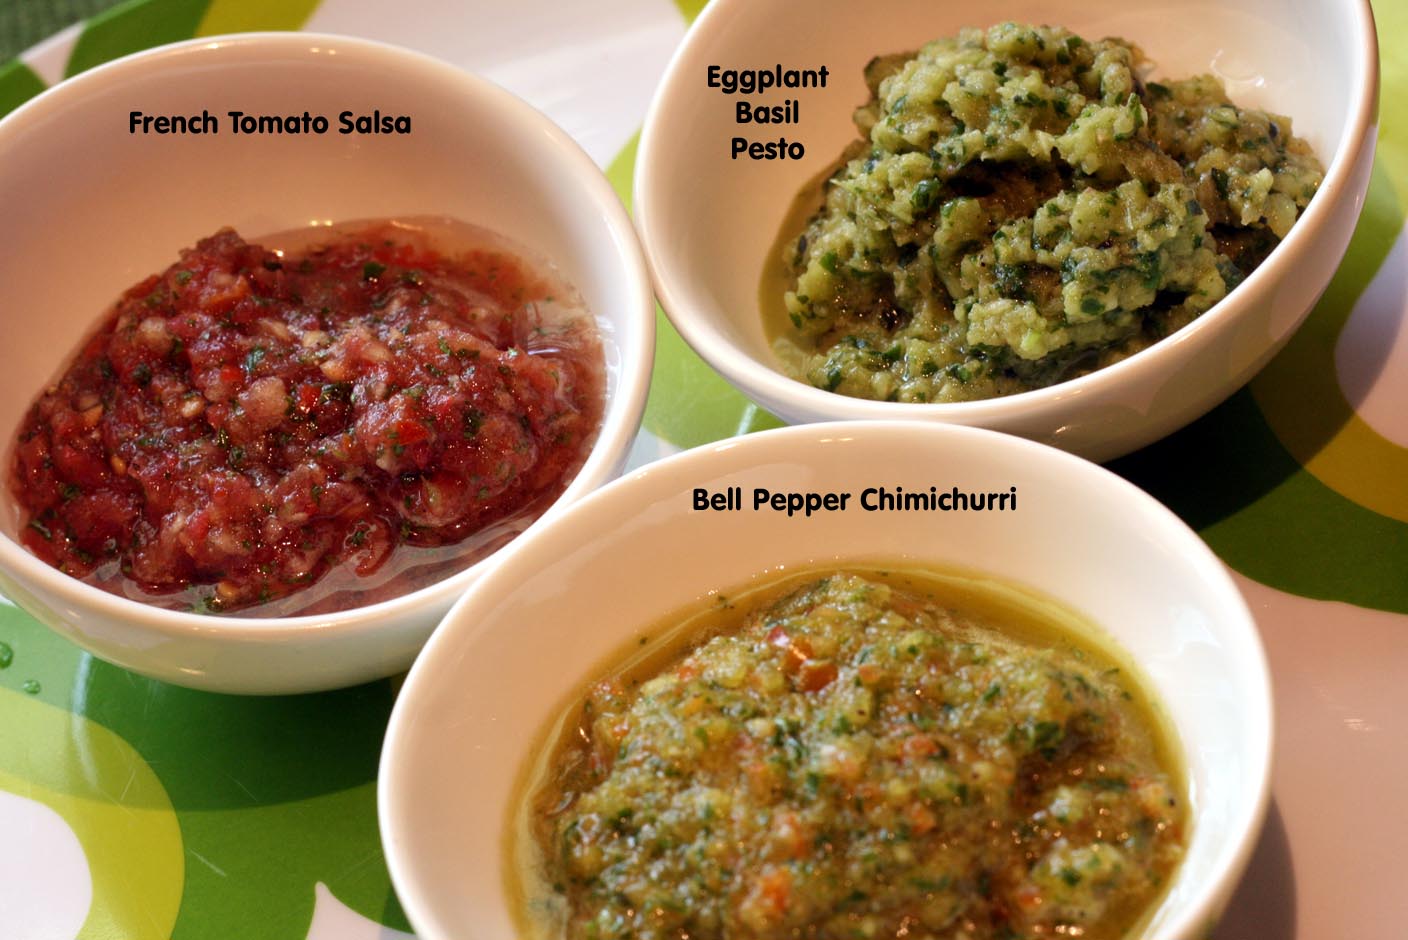 The Tampa Personal Chef Blog: paleo diet sauces and recipes